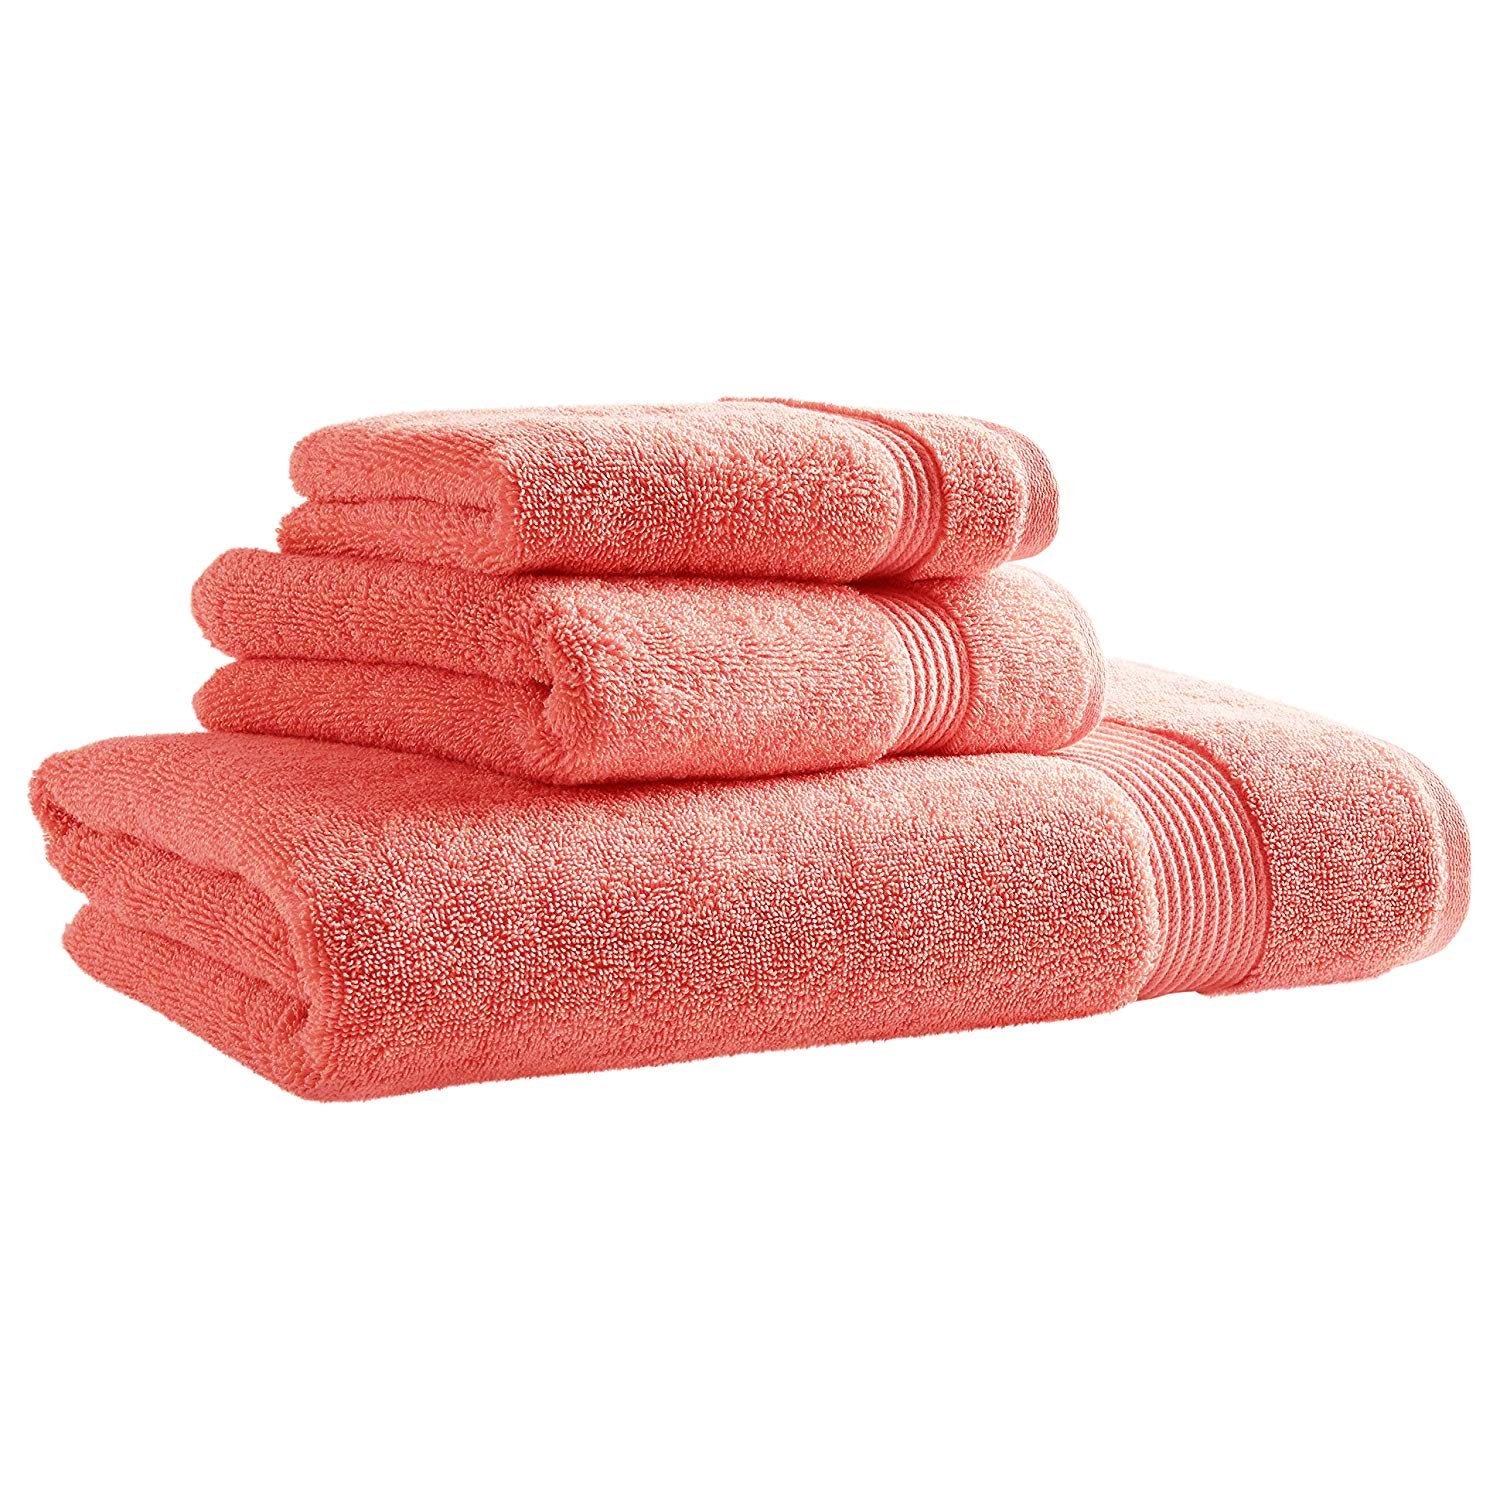 Baby Pink Egyptian Cotton Towel - Pack of 3 - waseeh.com